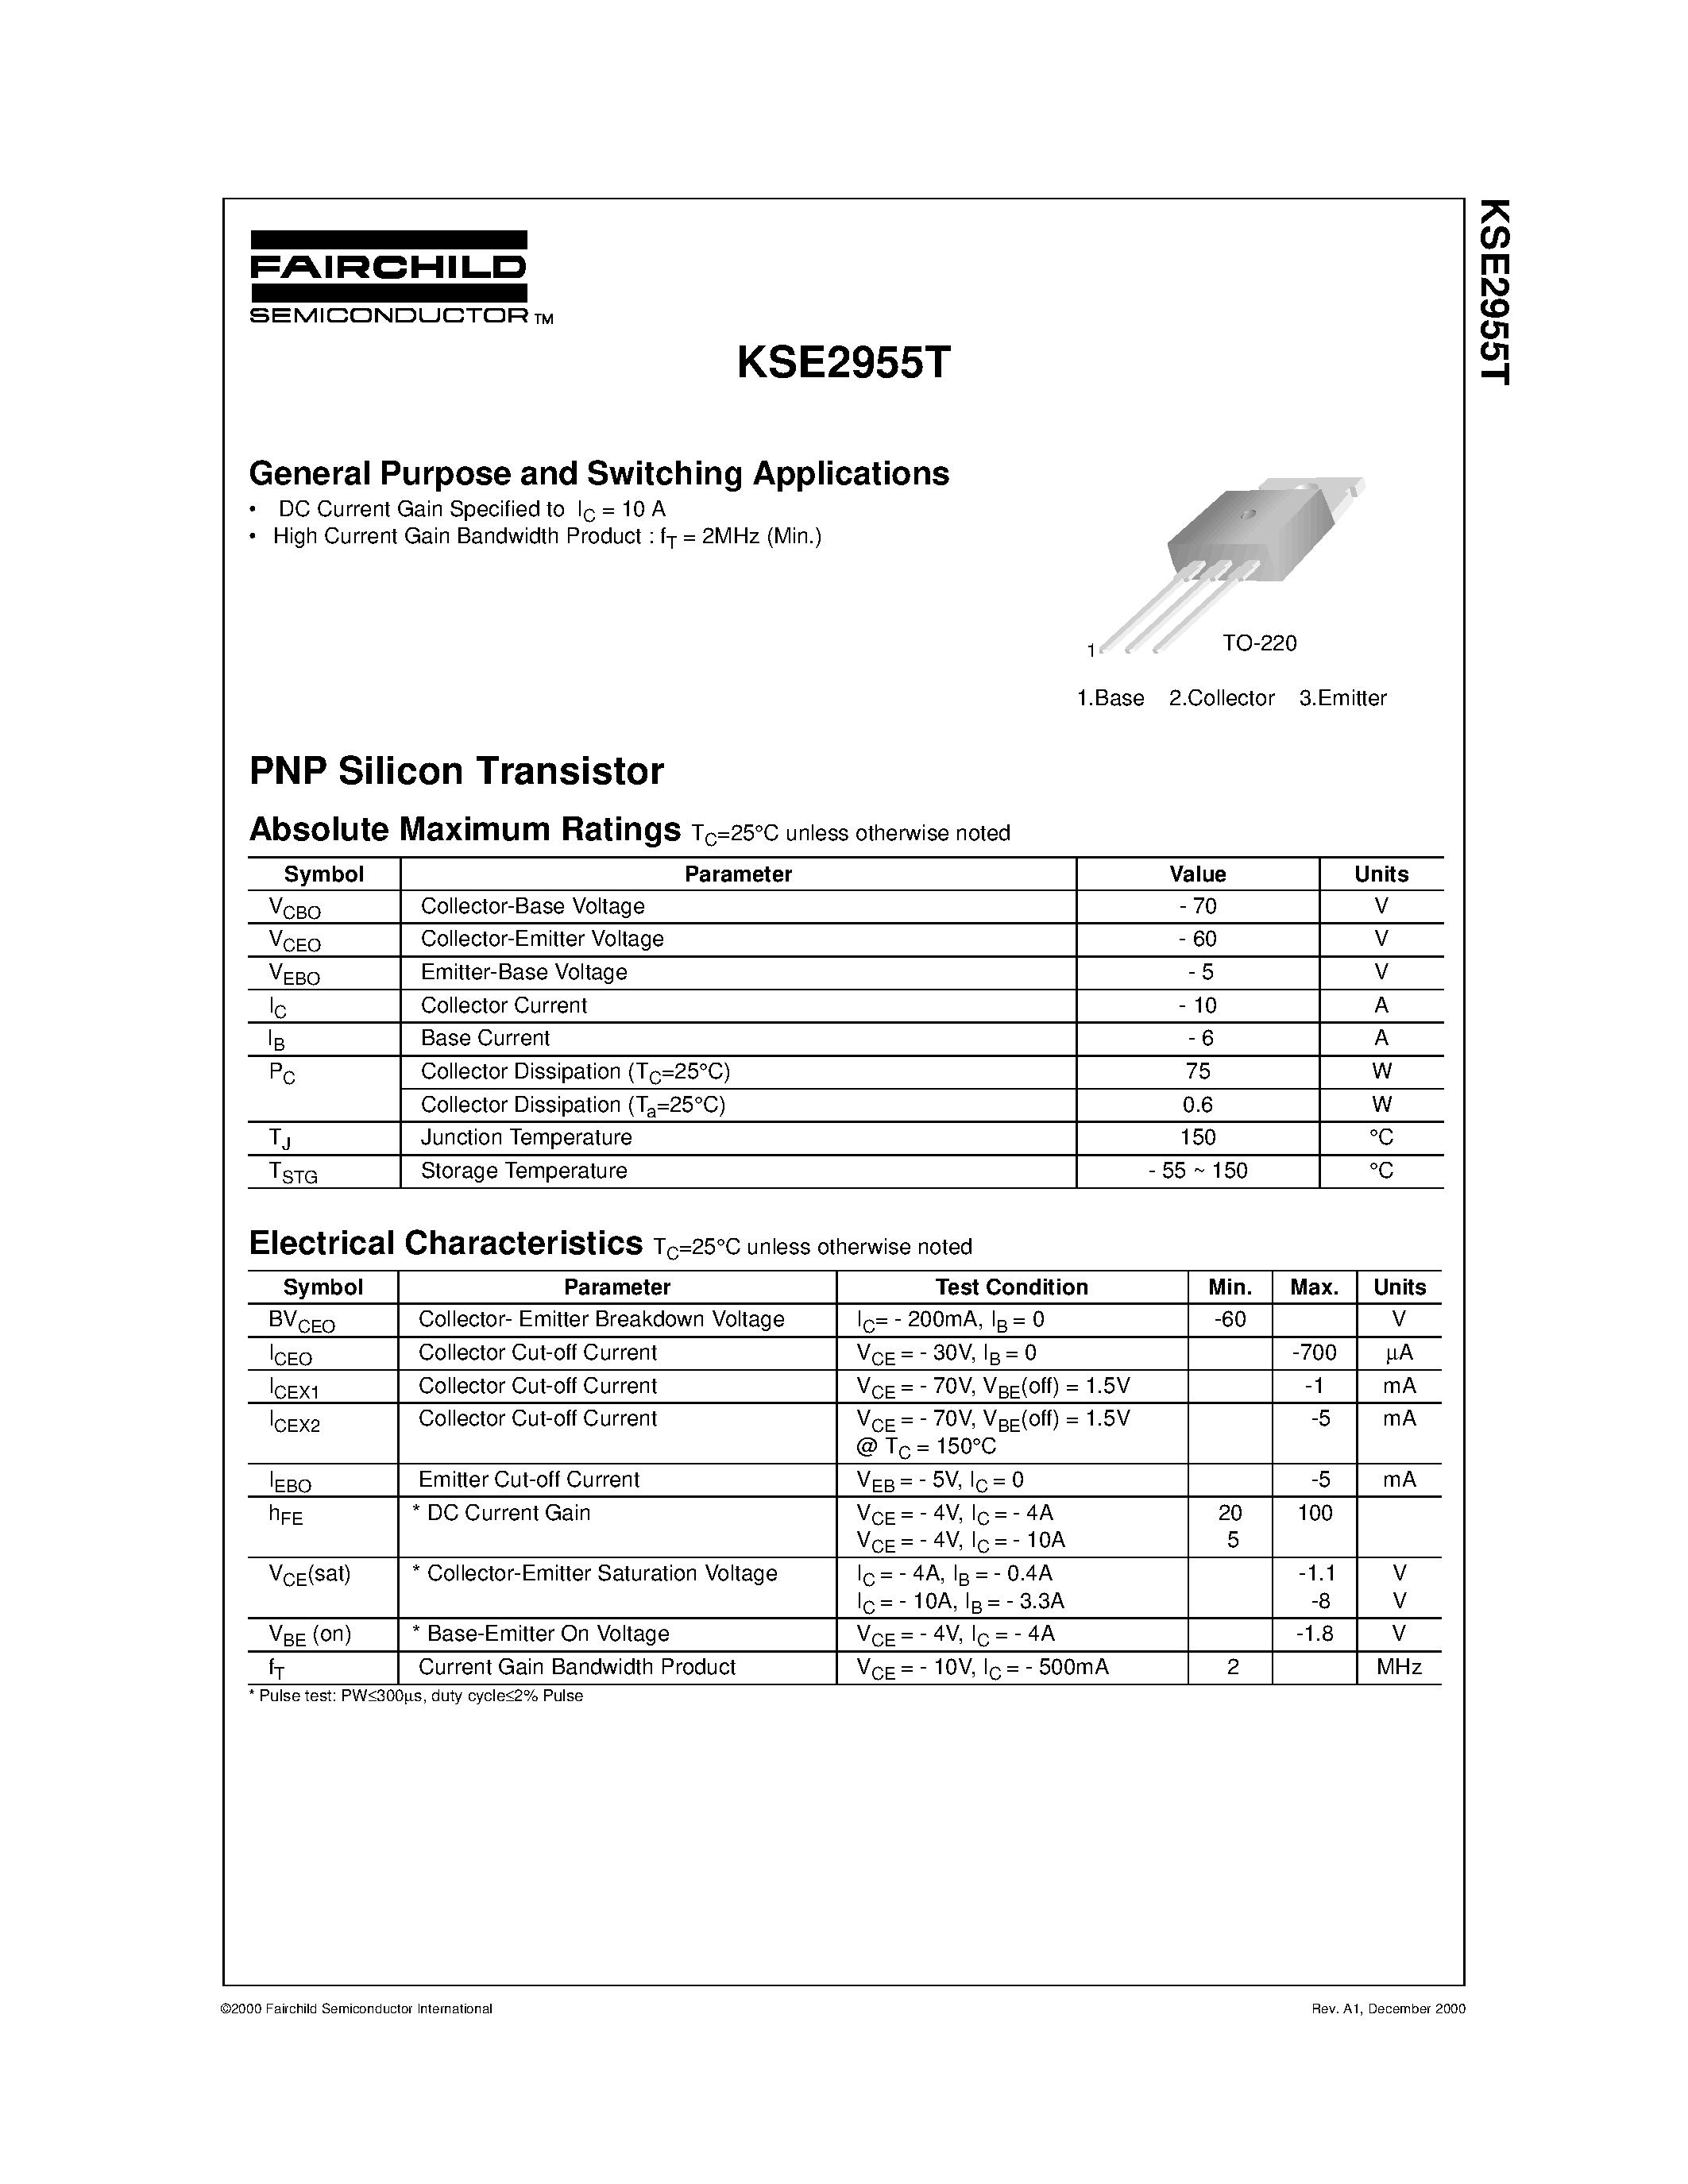 Datasheet KSE2955 - General Purpose and Switching Applications page 1